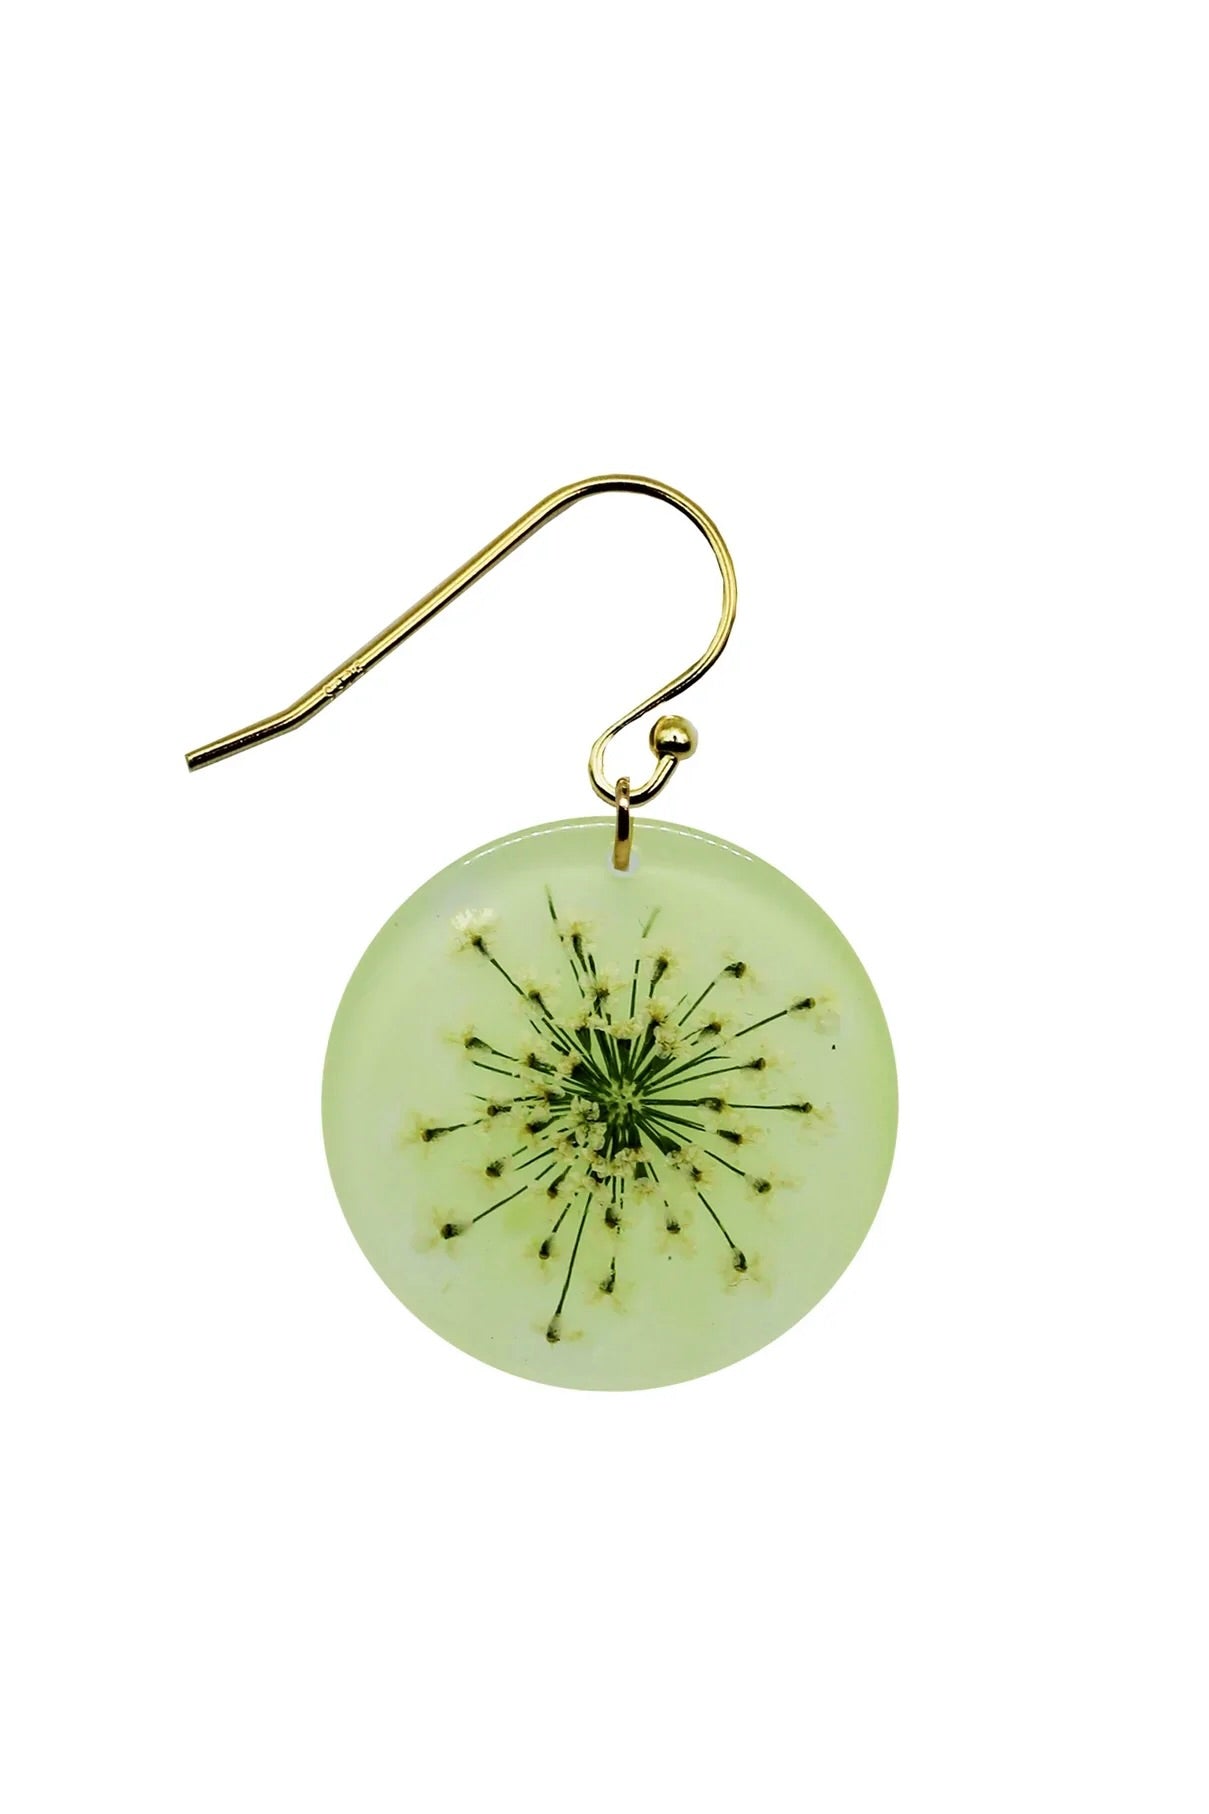 Dauphinette- Glow in the Dark Queen Anne's Lace Earring: Gold